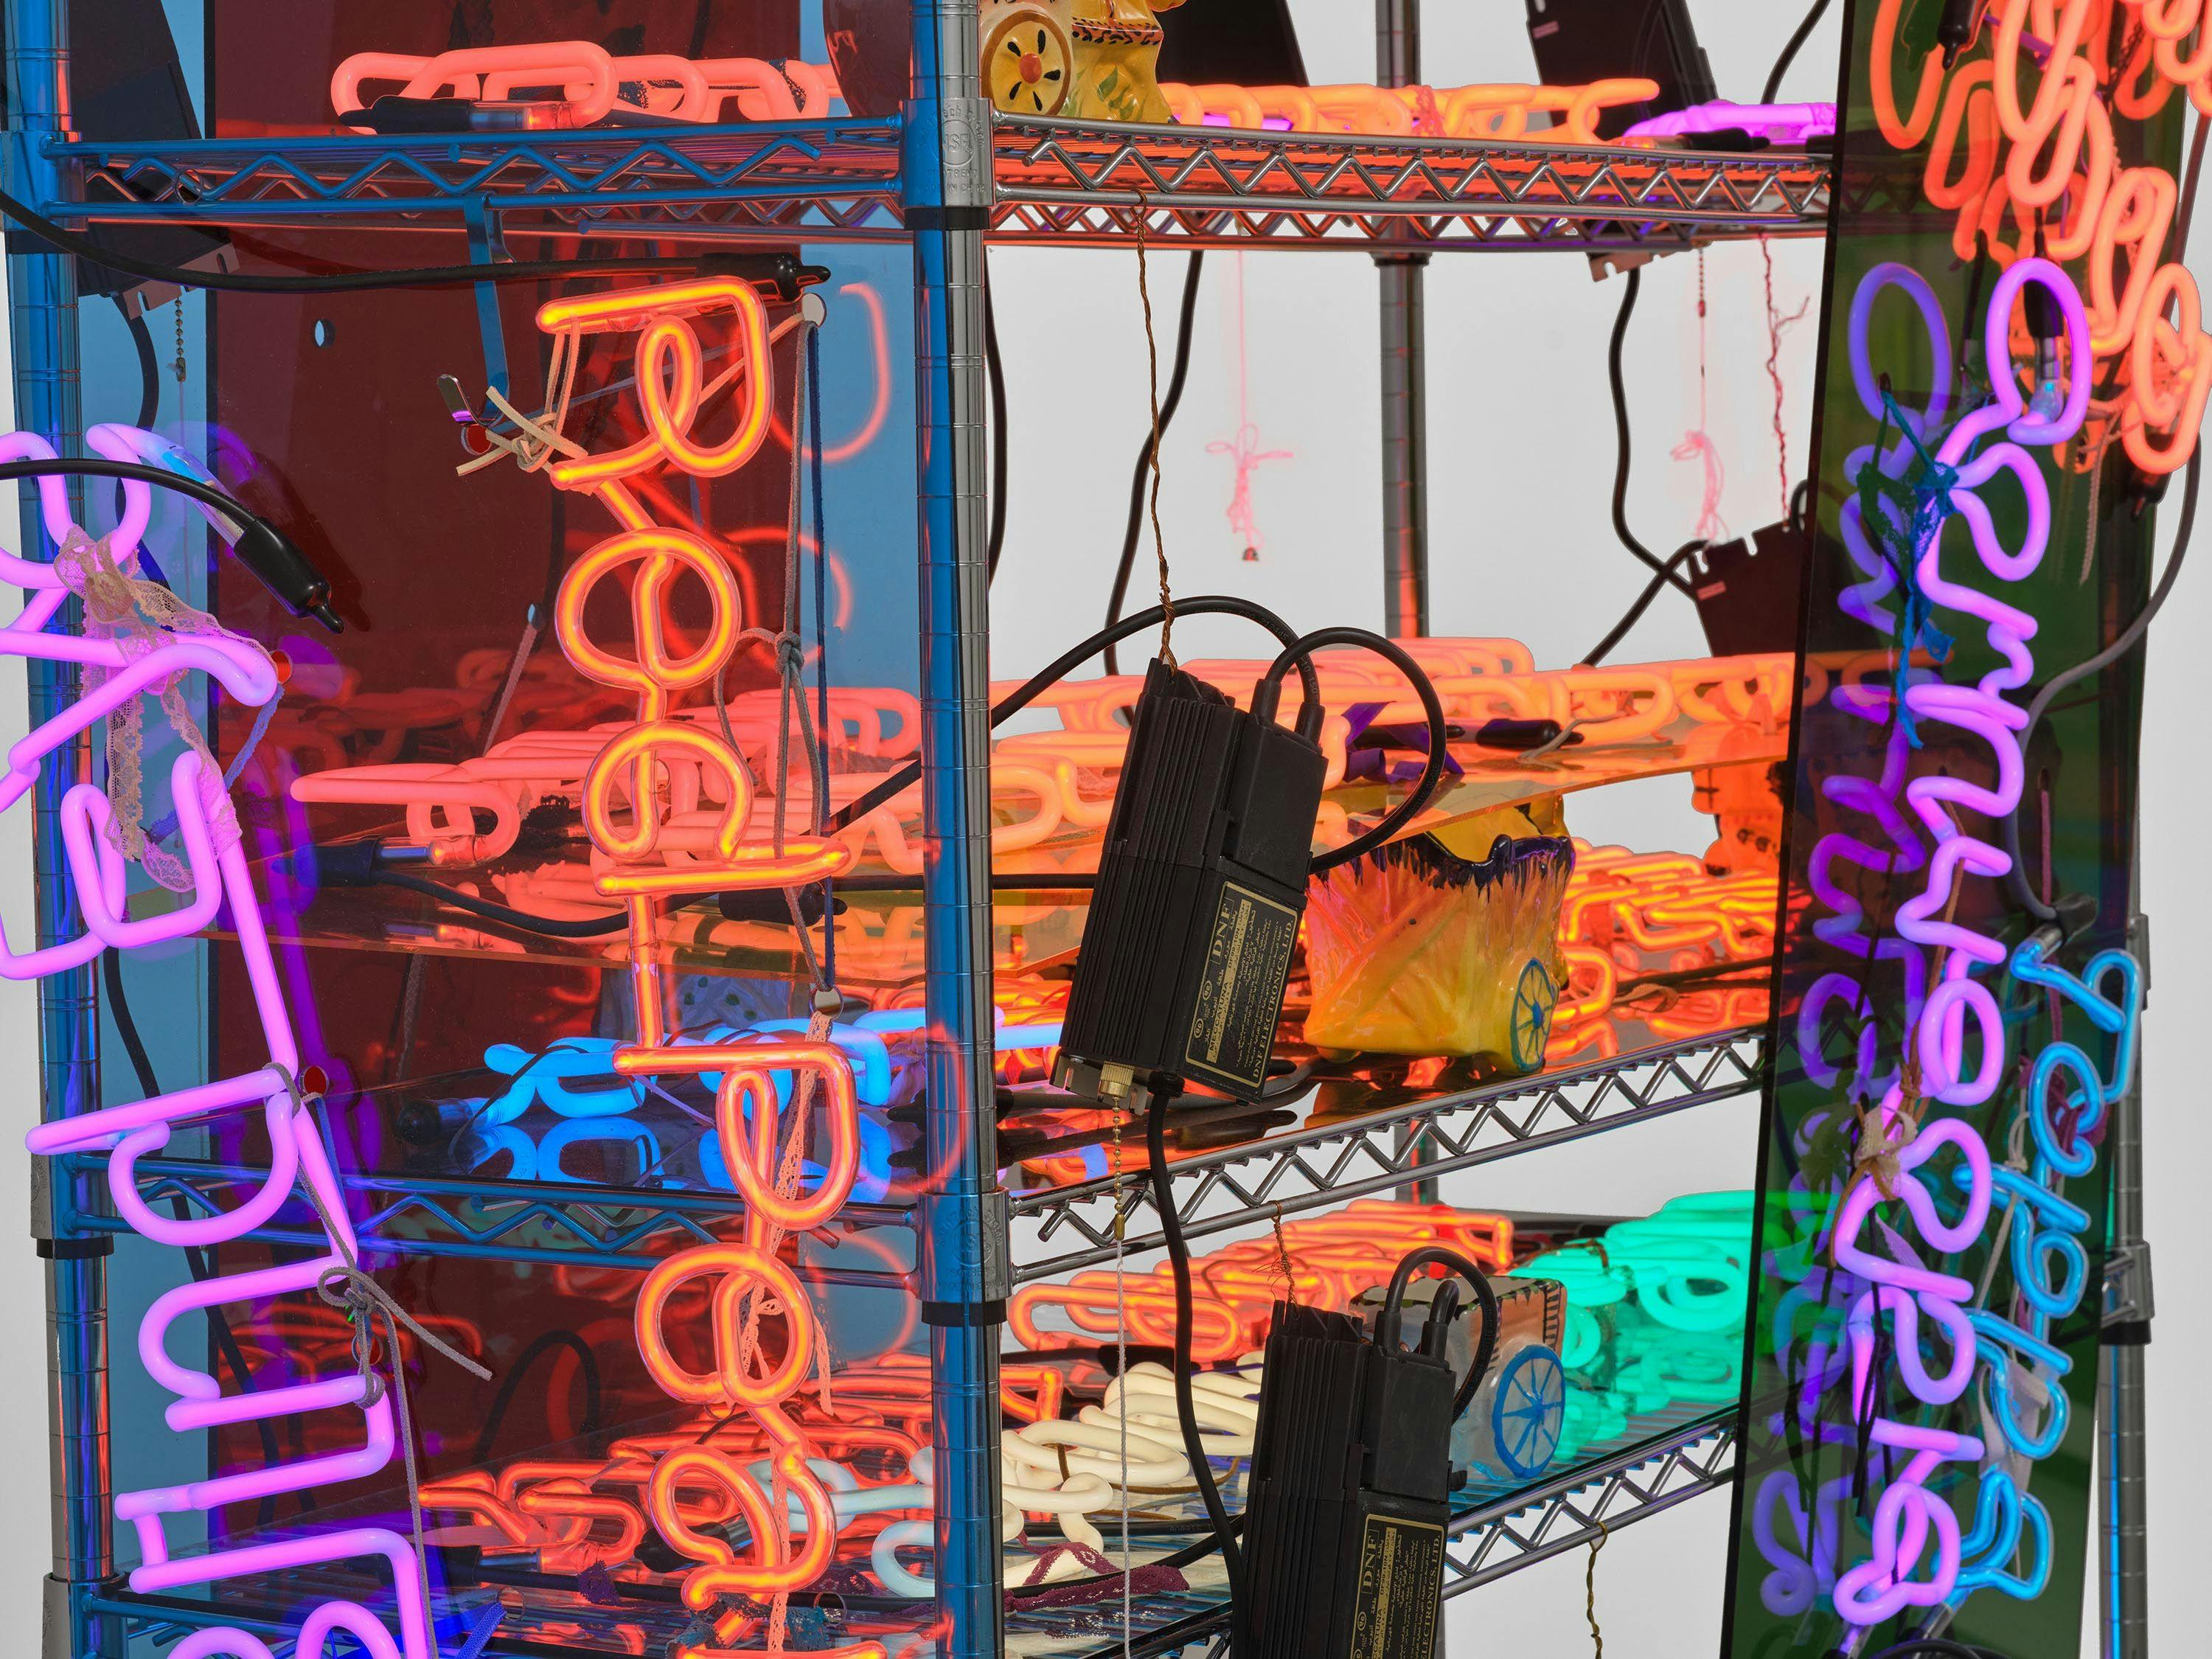 A detail from a sculpture by Jason Rhoades, titled Down Under, dated 2003.